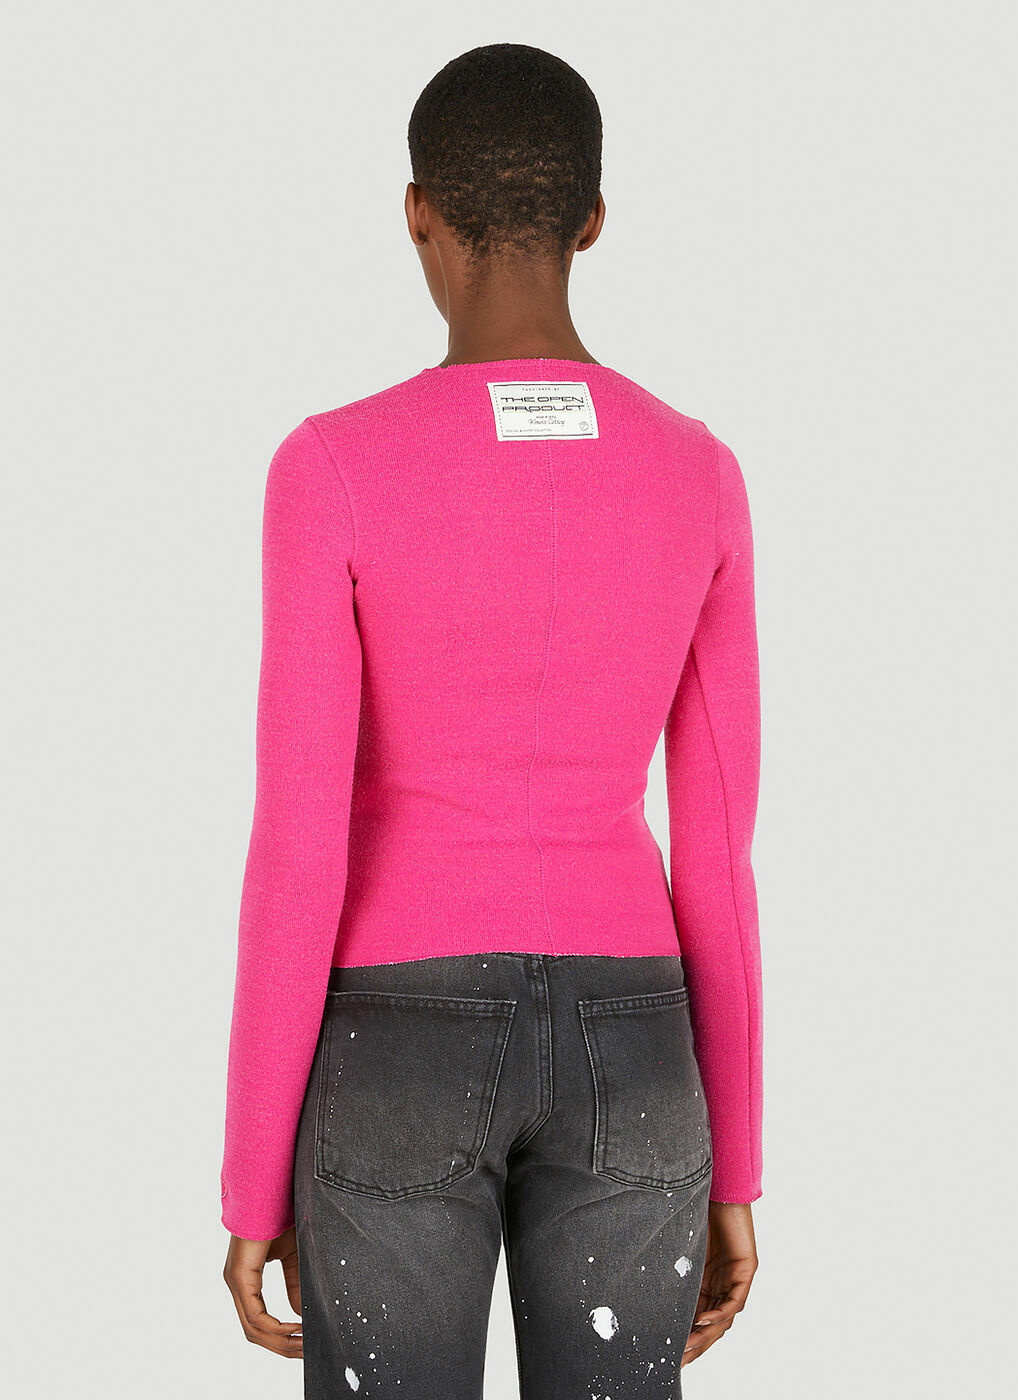 Saturn Knit Top in Pink TheOpen Product